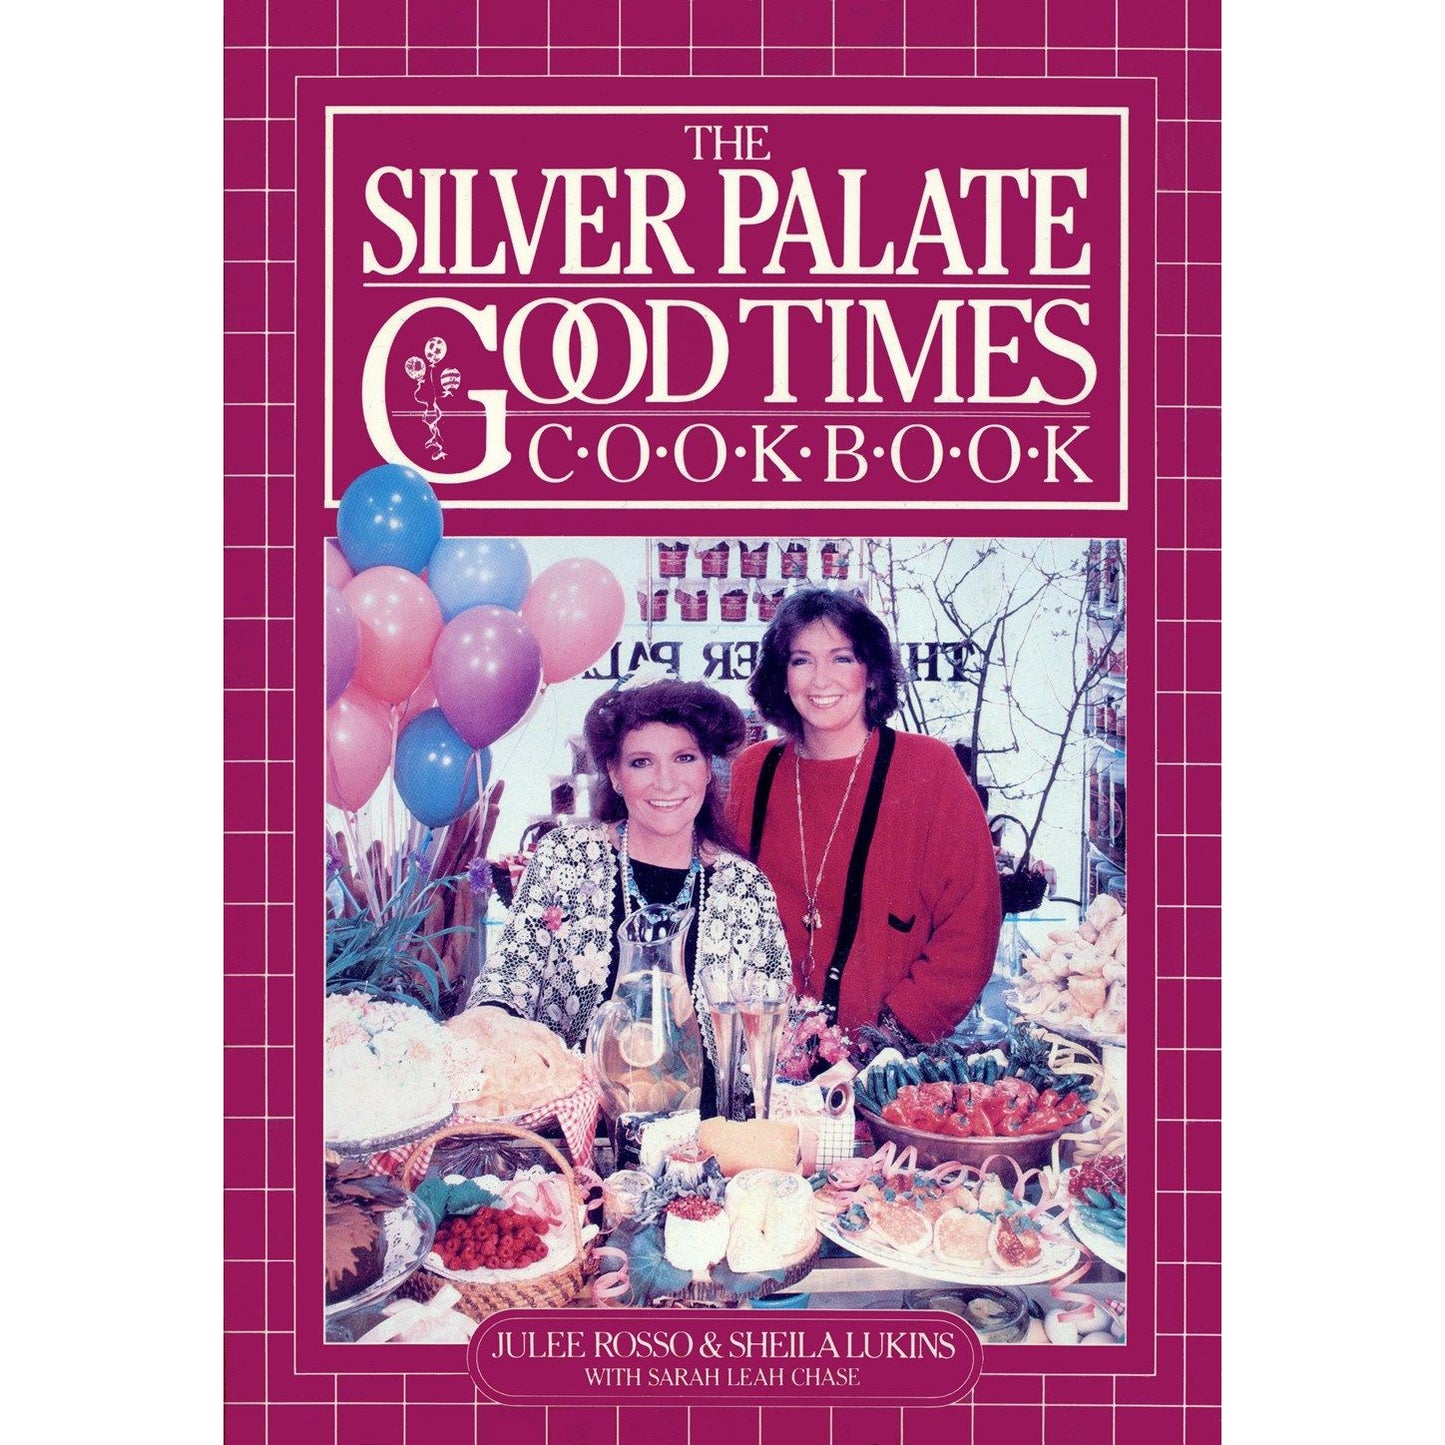 The Silver Palate Good Times Cookbook (Julee Rosso & Sheila Lukins)